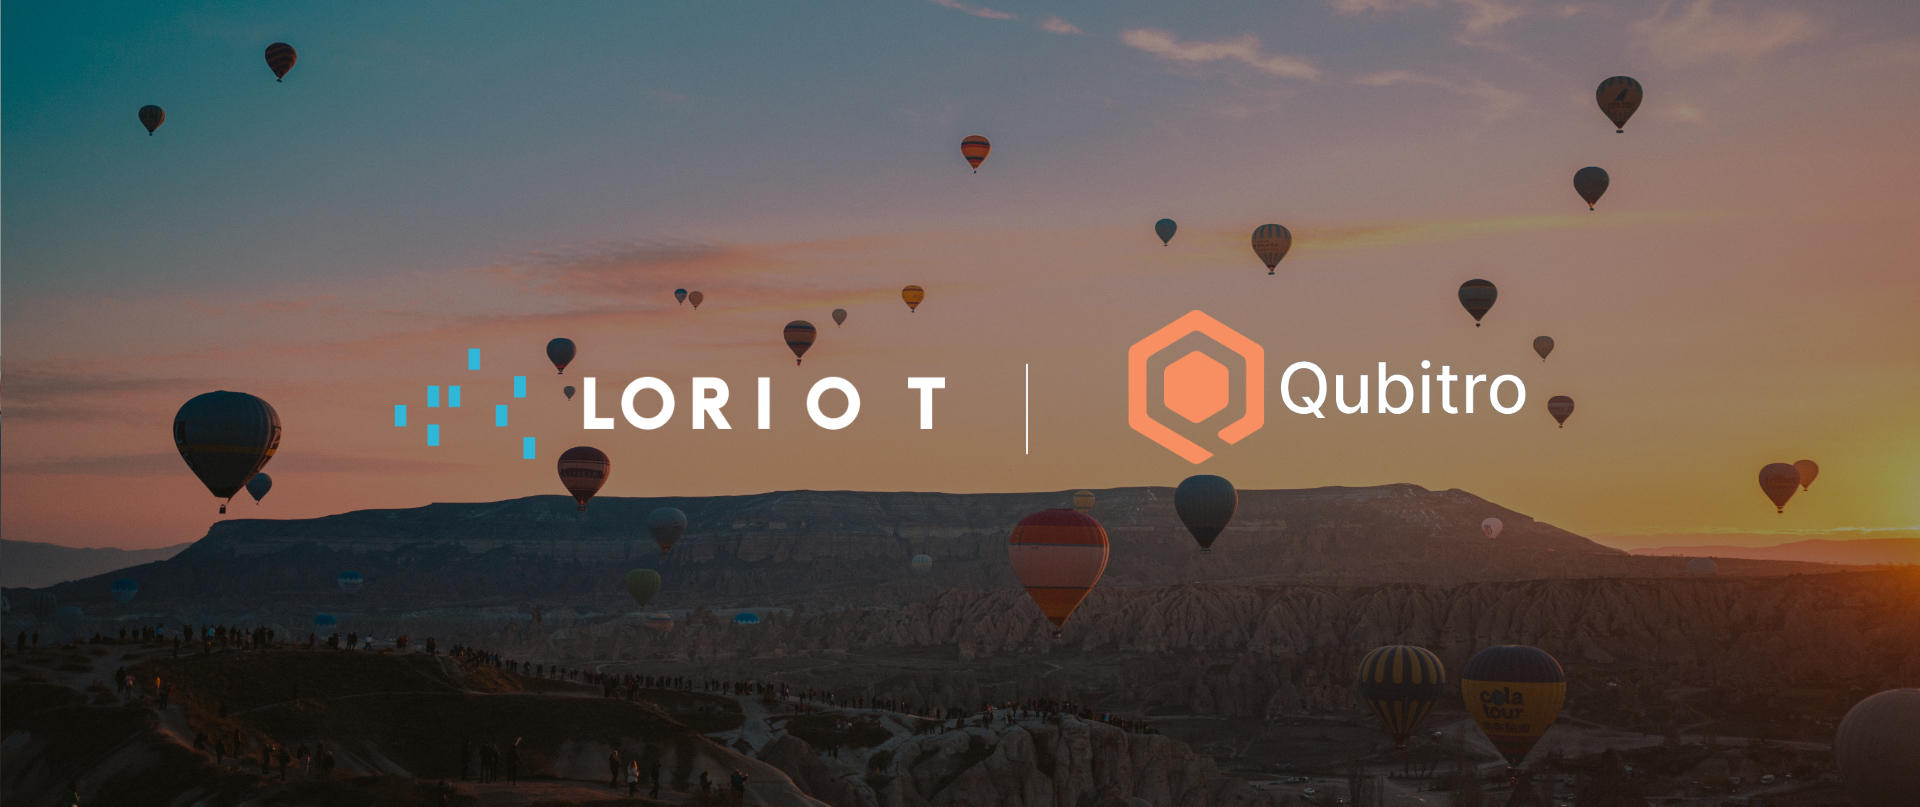 LORIOT and Qubitro partner to accelerate IoT dissemination globally